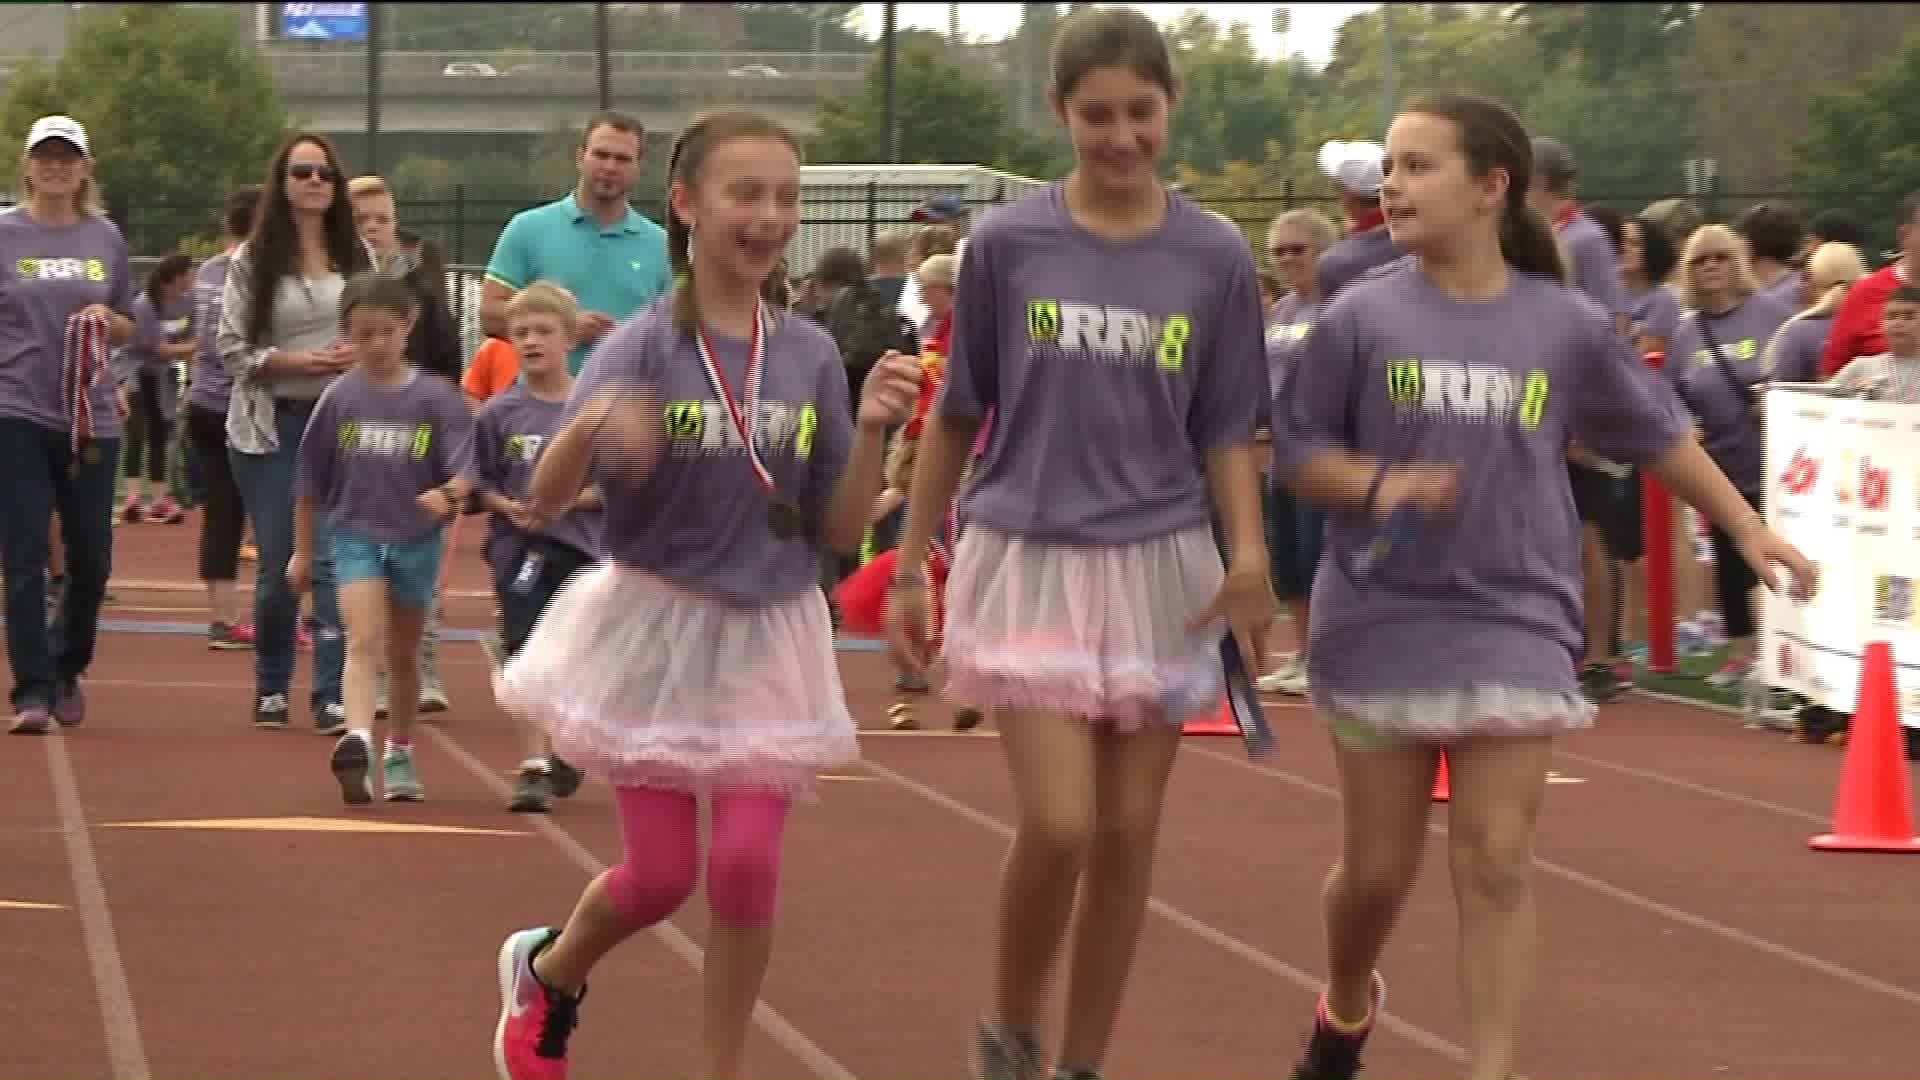 Record Crowd for WNEP's Ryan's Run 5K & All Abilities Walk